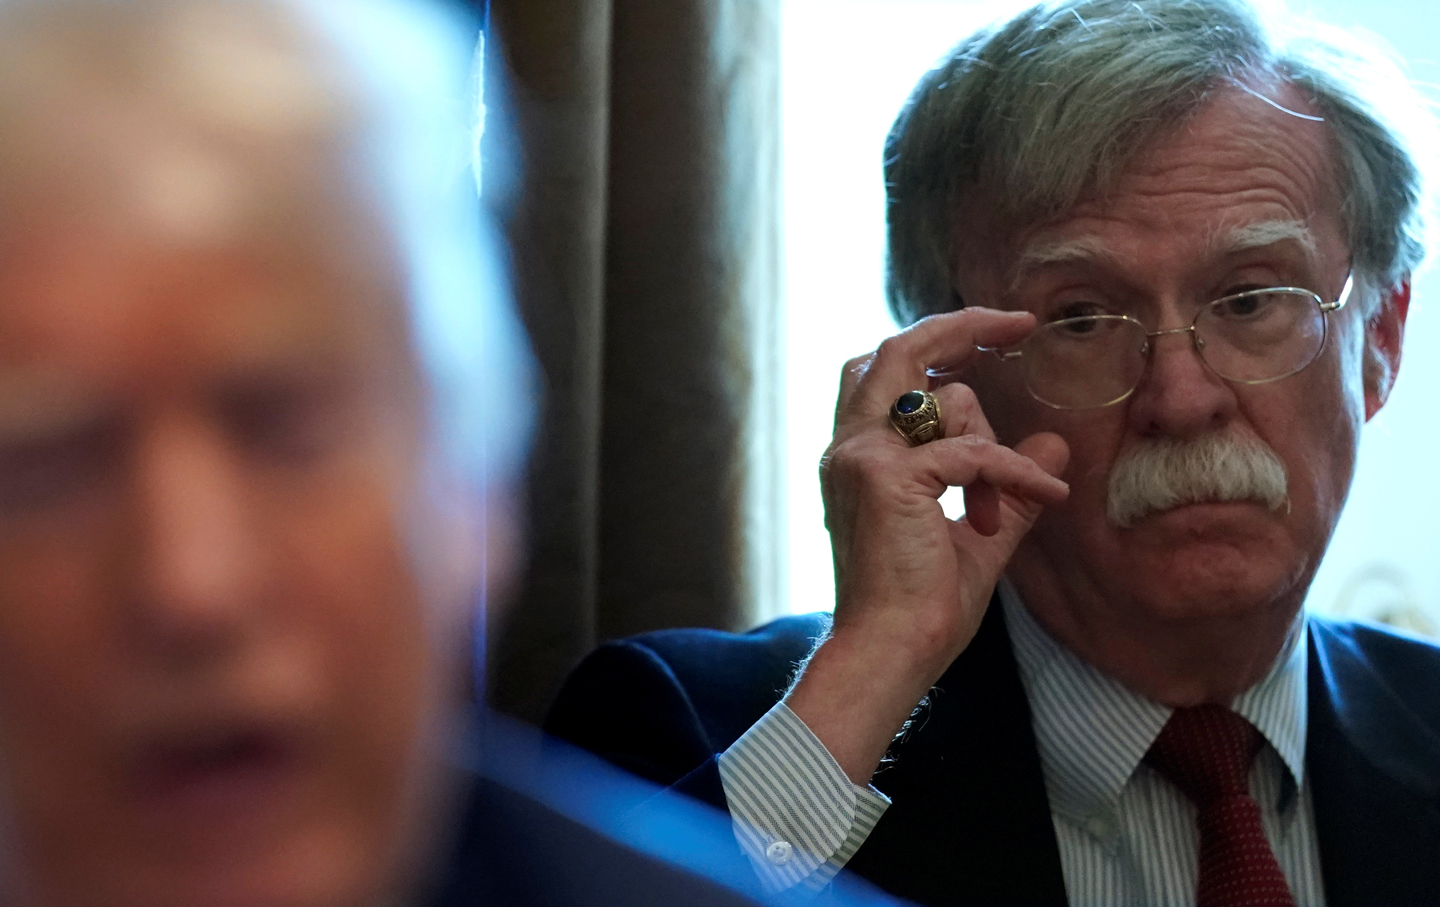 John Bolton at a cabinet meeting with Donald Trump